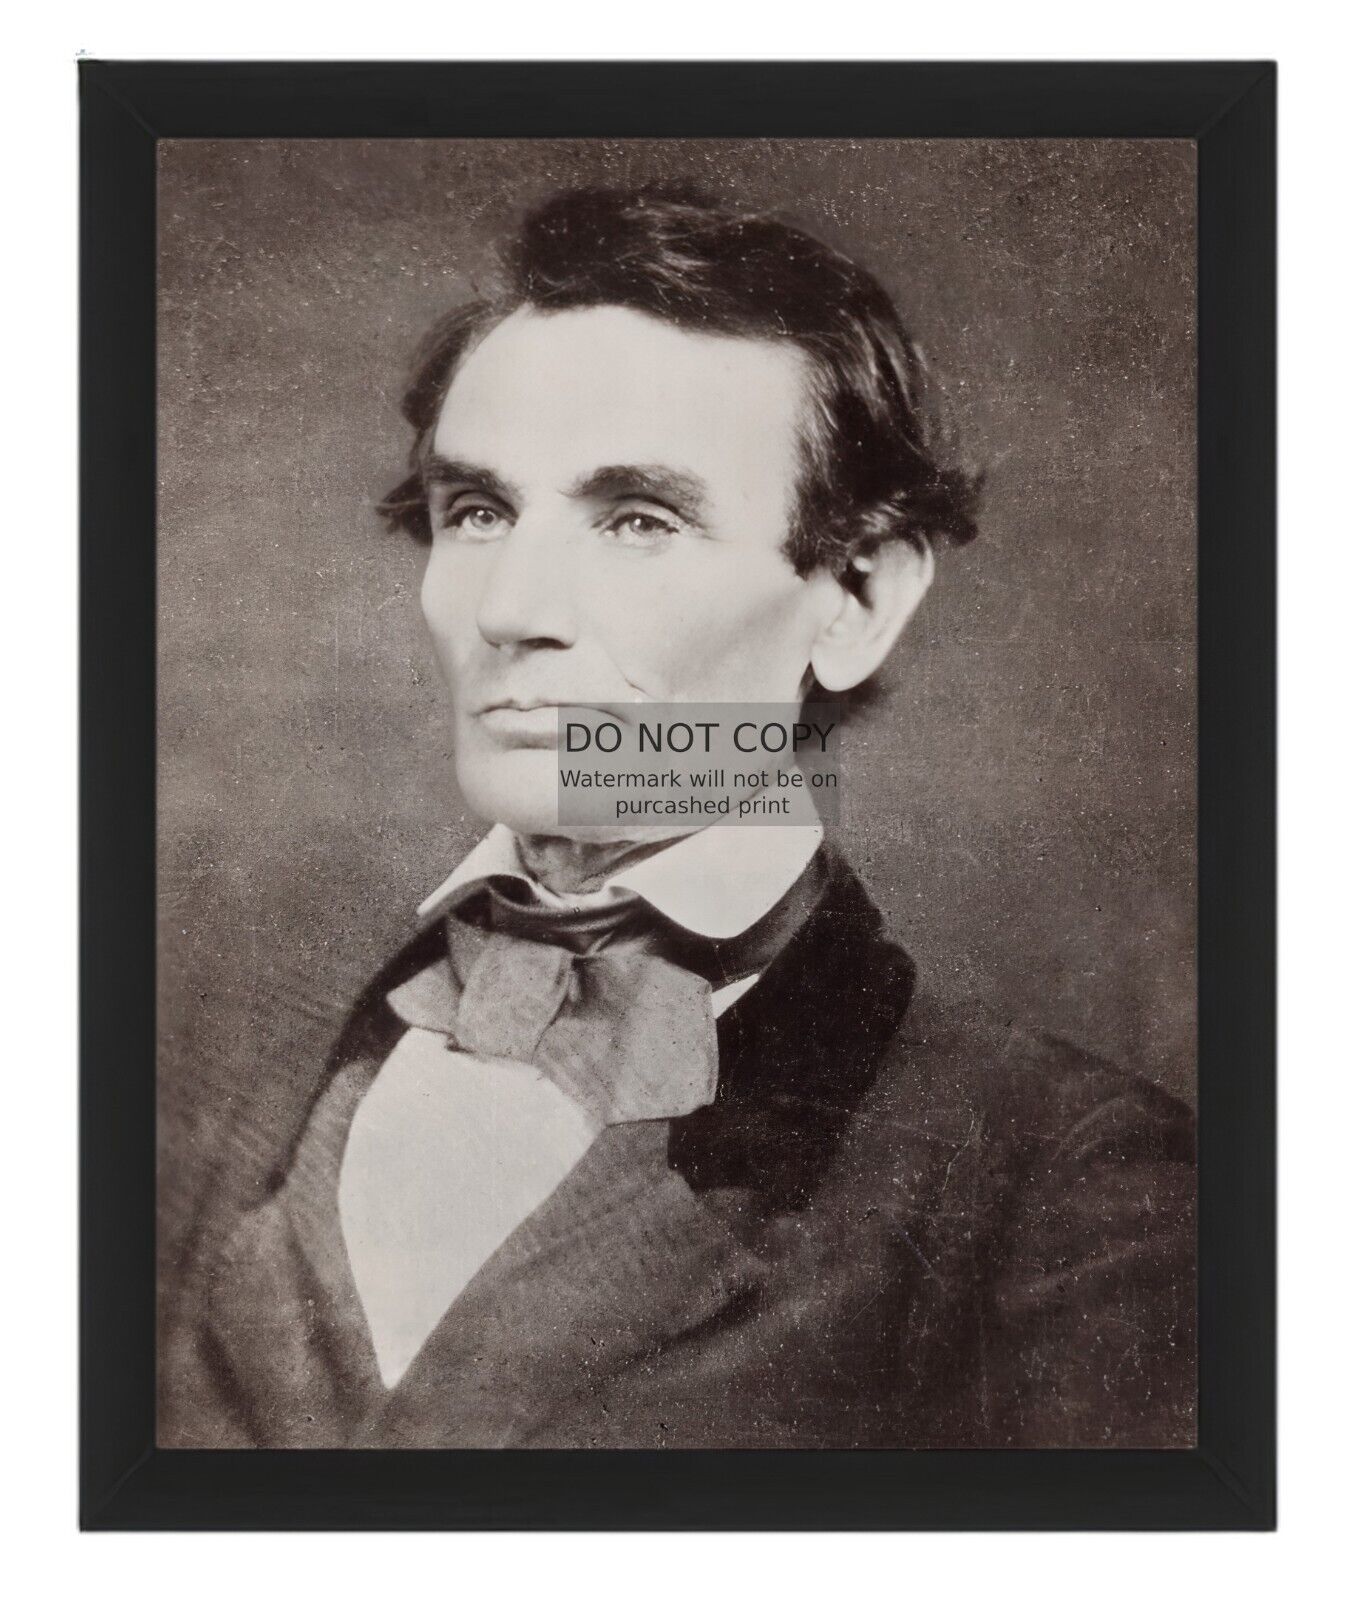 PRESIDENT ABRAHAM LINCOLN IN SUIT EARLY PHOTOGRAPH 1858 8X10 FRAMED PHOTO